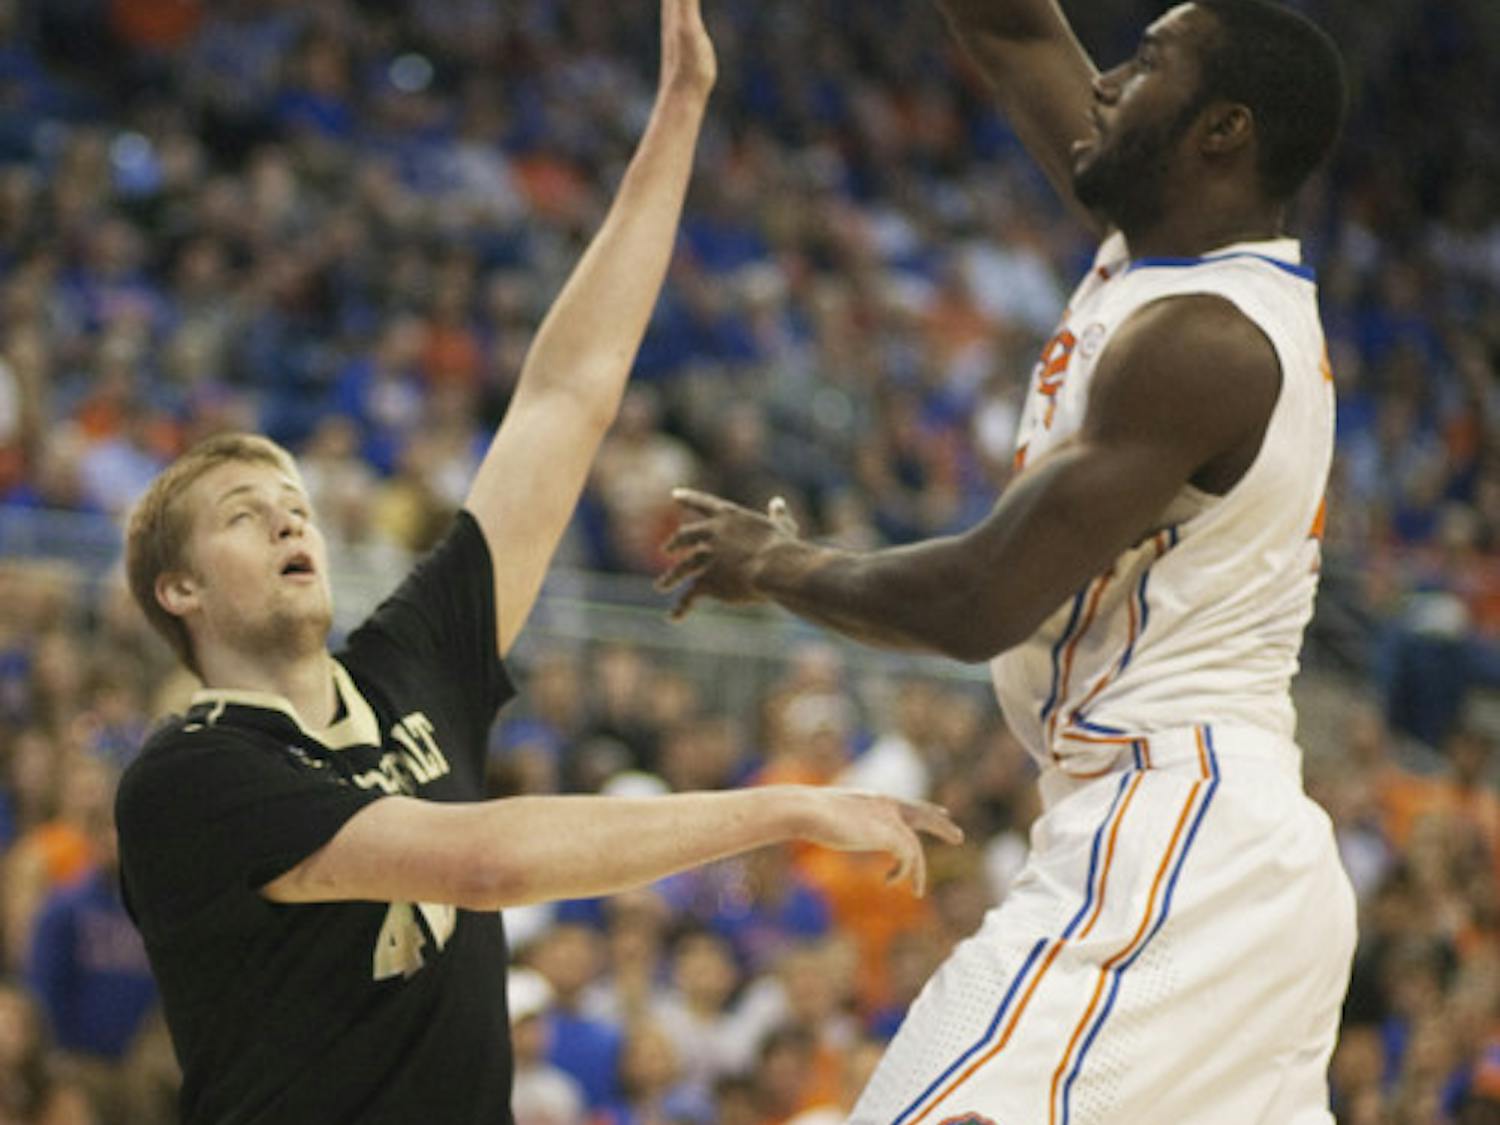 Junior center Patric Young (right) attempts a hook shot during Florida’s 66-40 win against Vanderbilt on March 6 in the O’Connell Center. .